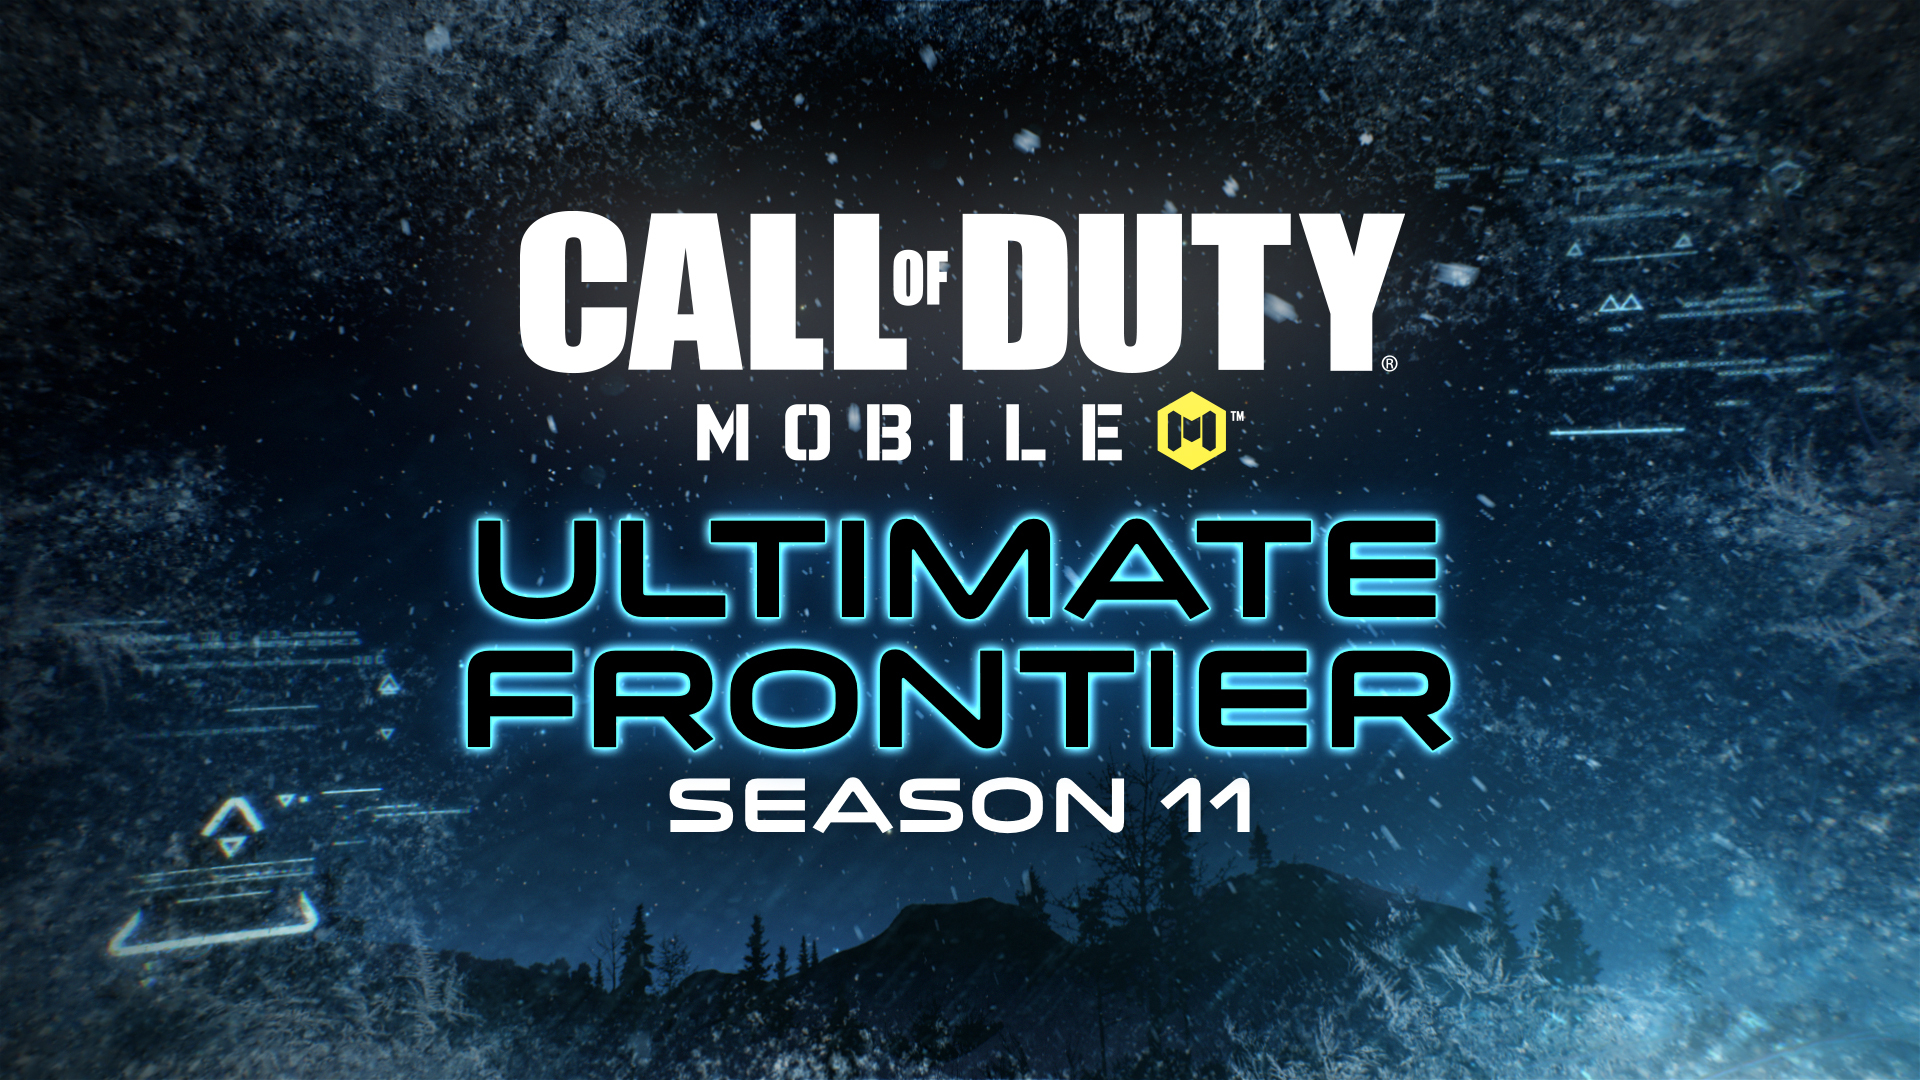 Call of Duty Mobile season 2 release date, buffs and nerfs, battle pass,  and more